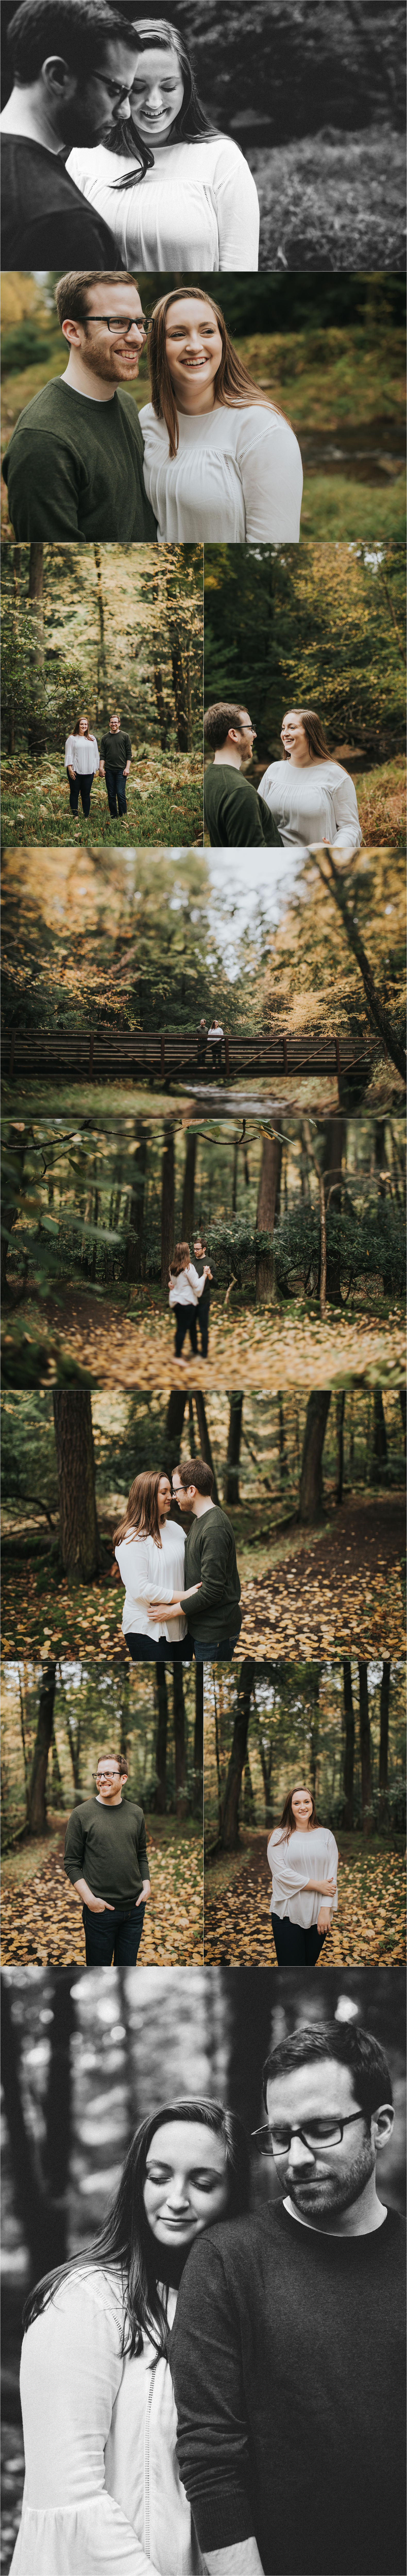 03-cook-forest-engagement-pictures.jpg